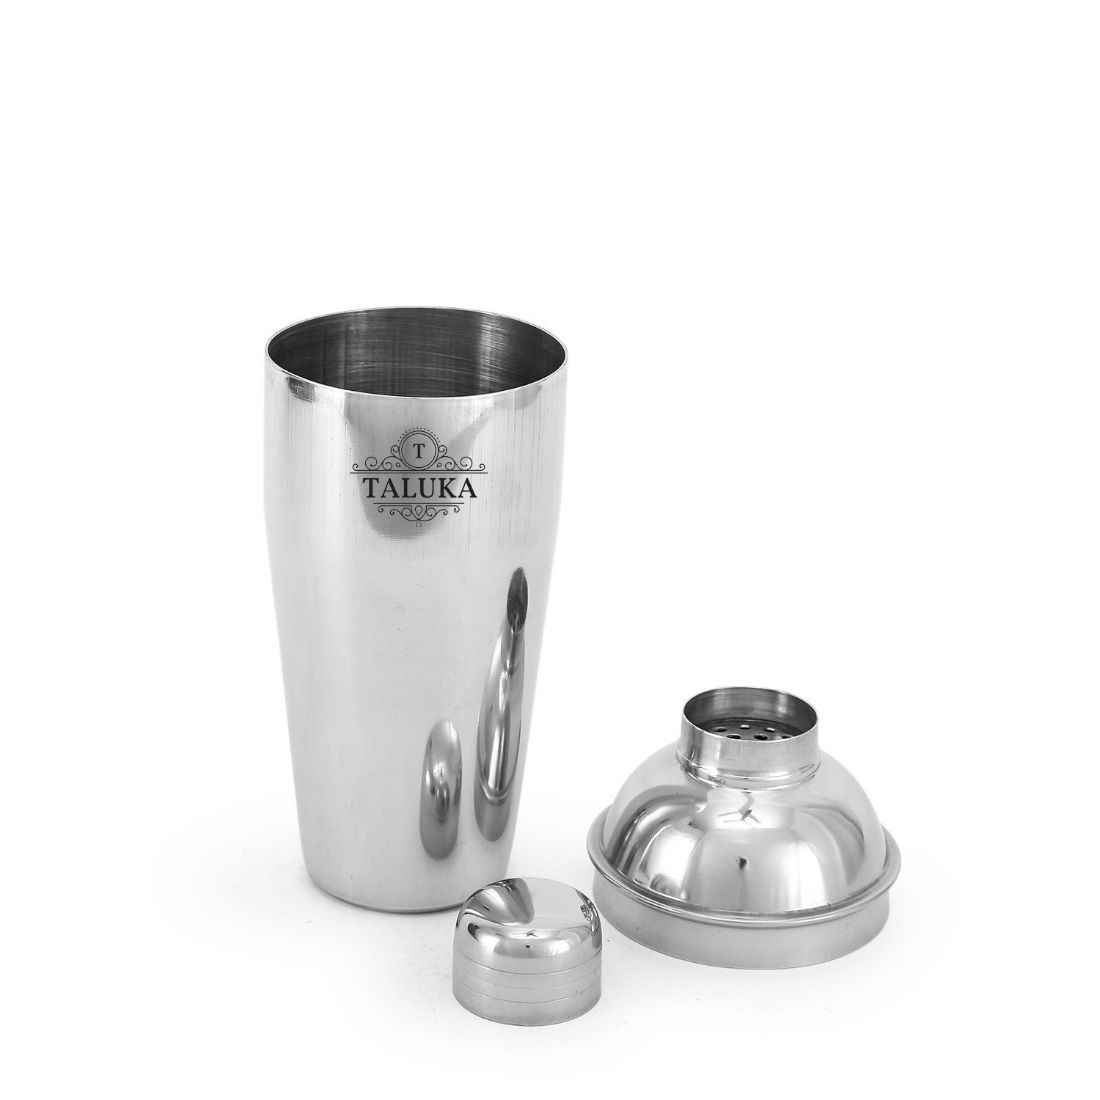 Stainless Steel Mocktail Juice Mixing & Serving Wine Cocktail Wine Shaker